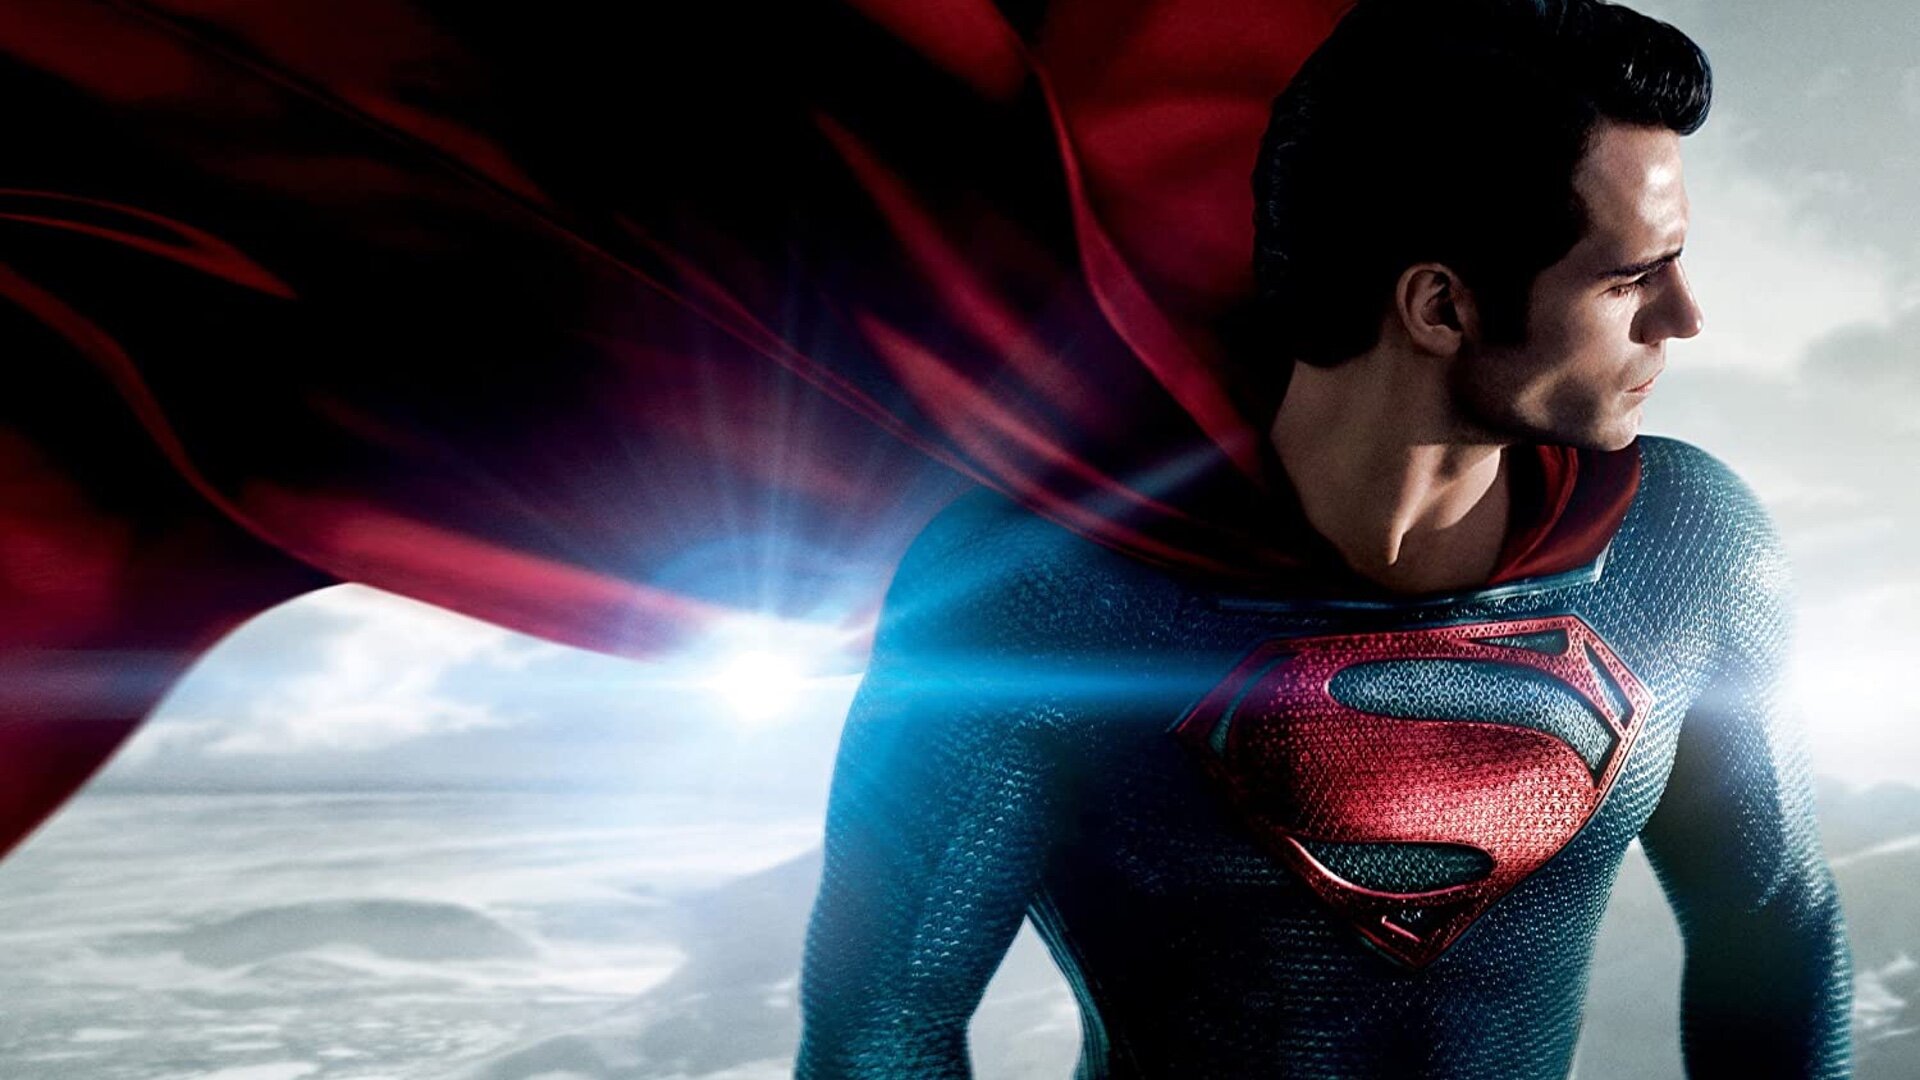 Henry Cavill Will No Longer Play Superman, As DC Focuses on Supergirl:  Report